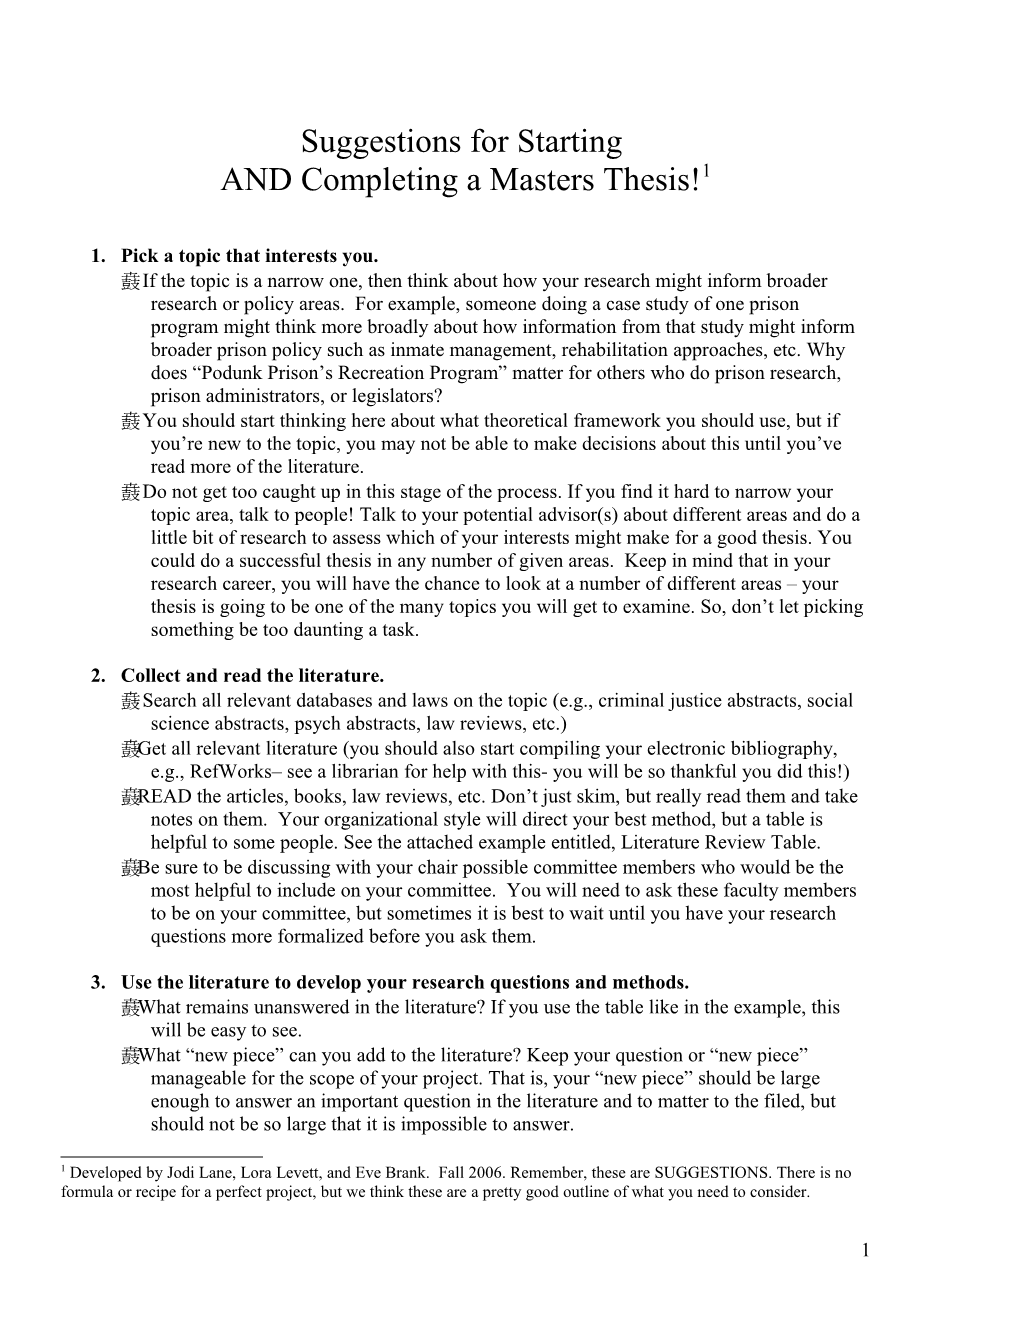 Suggestions for Completing a Masters Thesis